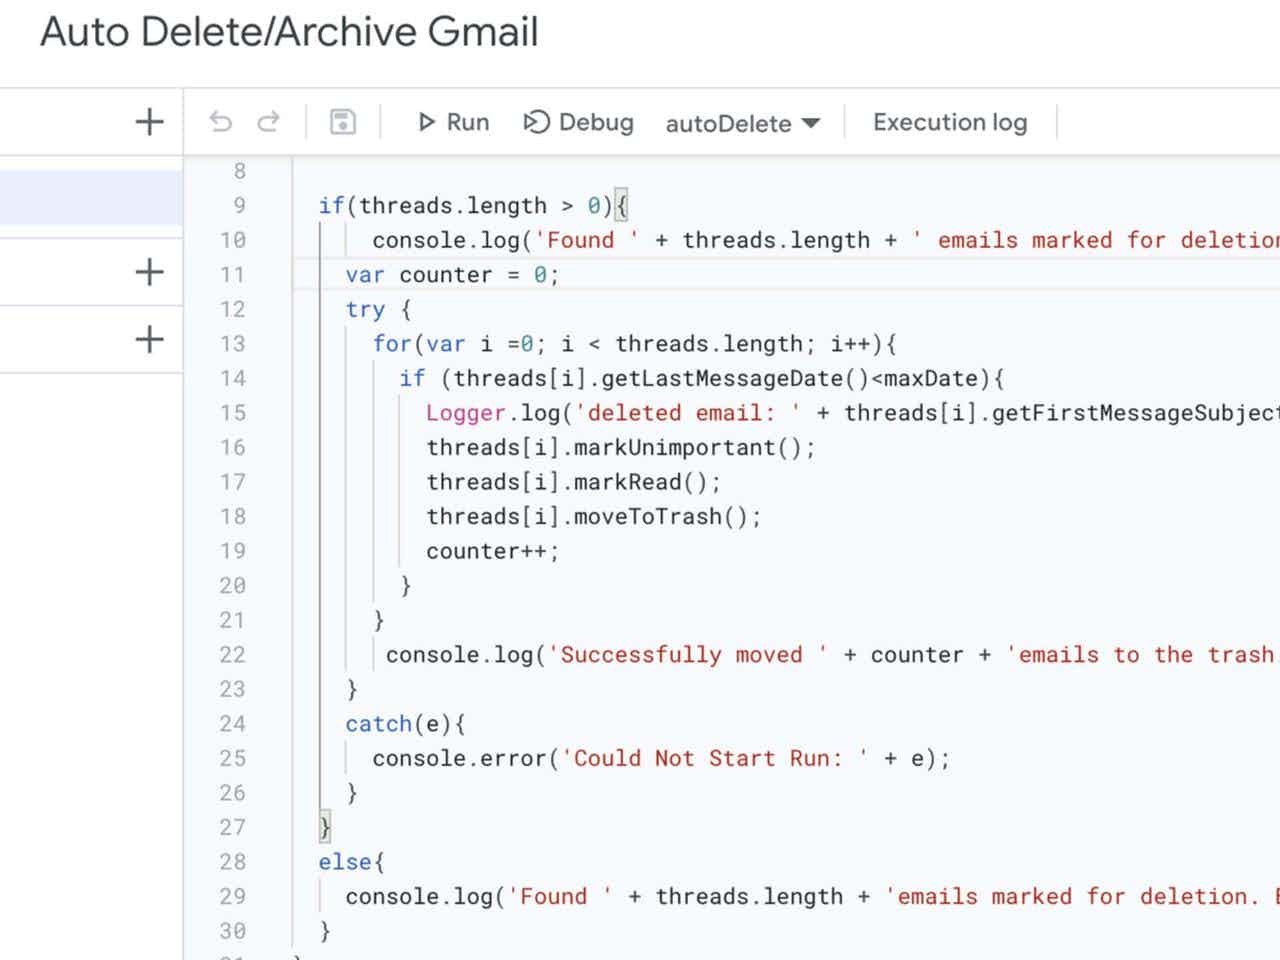 cover photo for Gmail: Auto Delete/Archive Emails After a Set Number of Days, written by Jordan Lambrecht